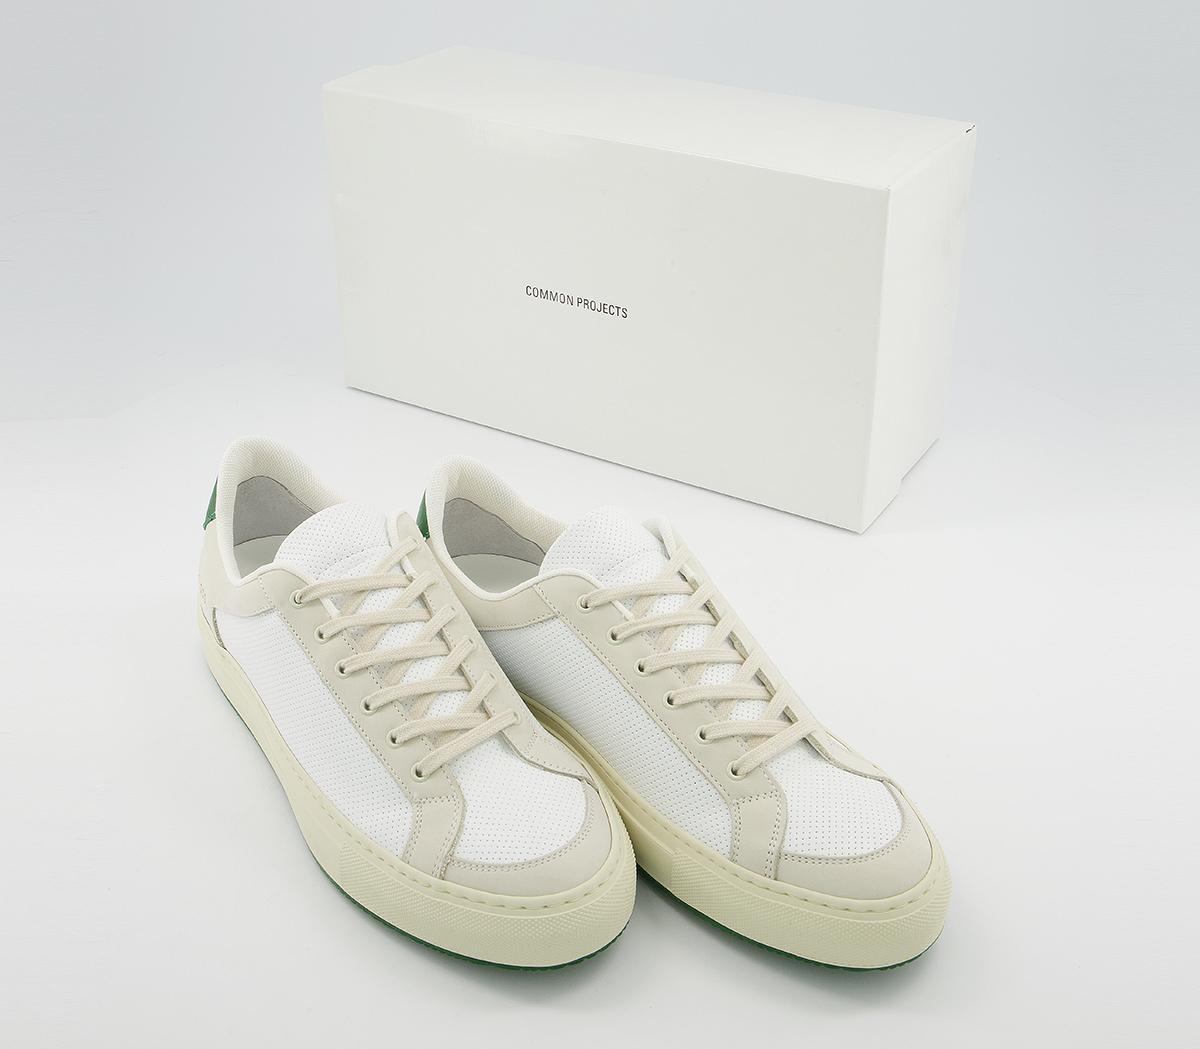 Common Projects Retro Low 70s Article Trainers White Green - His trainers